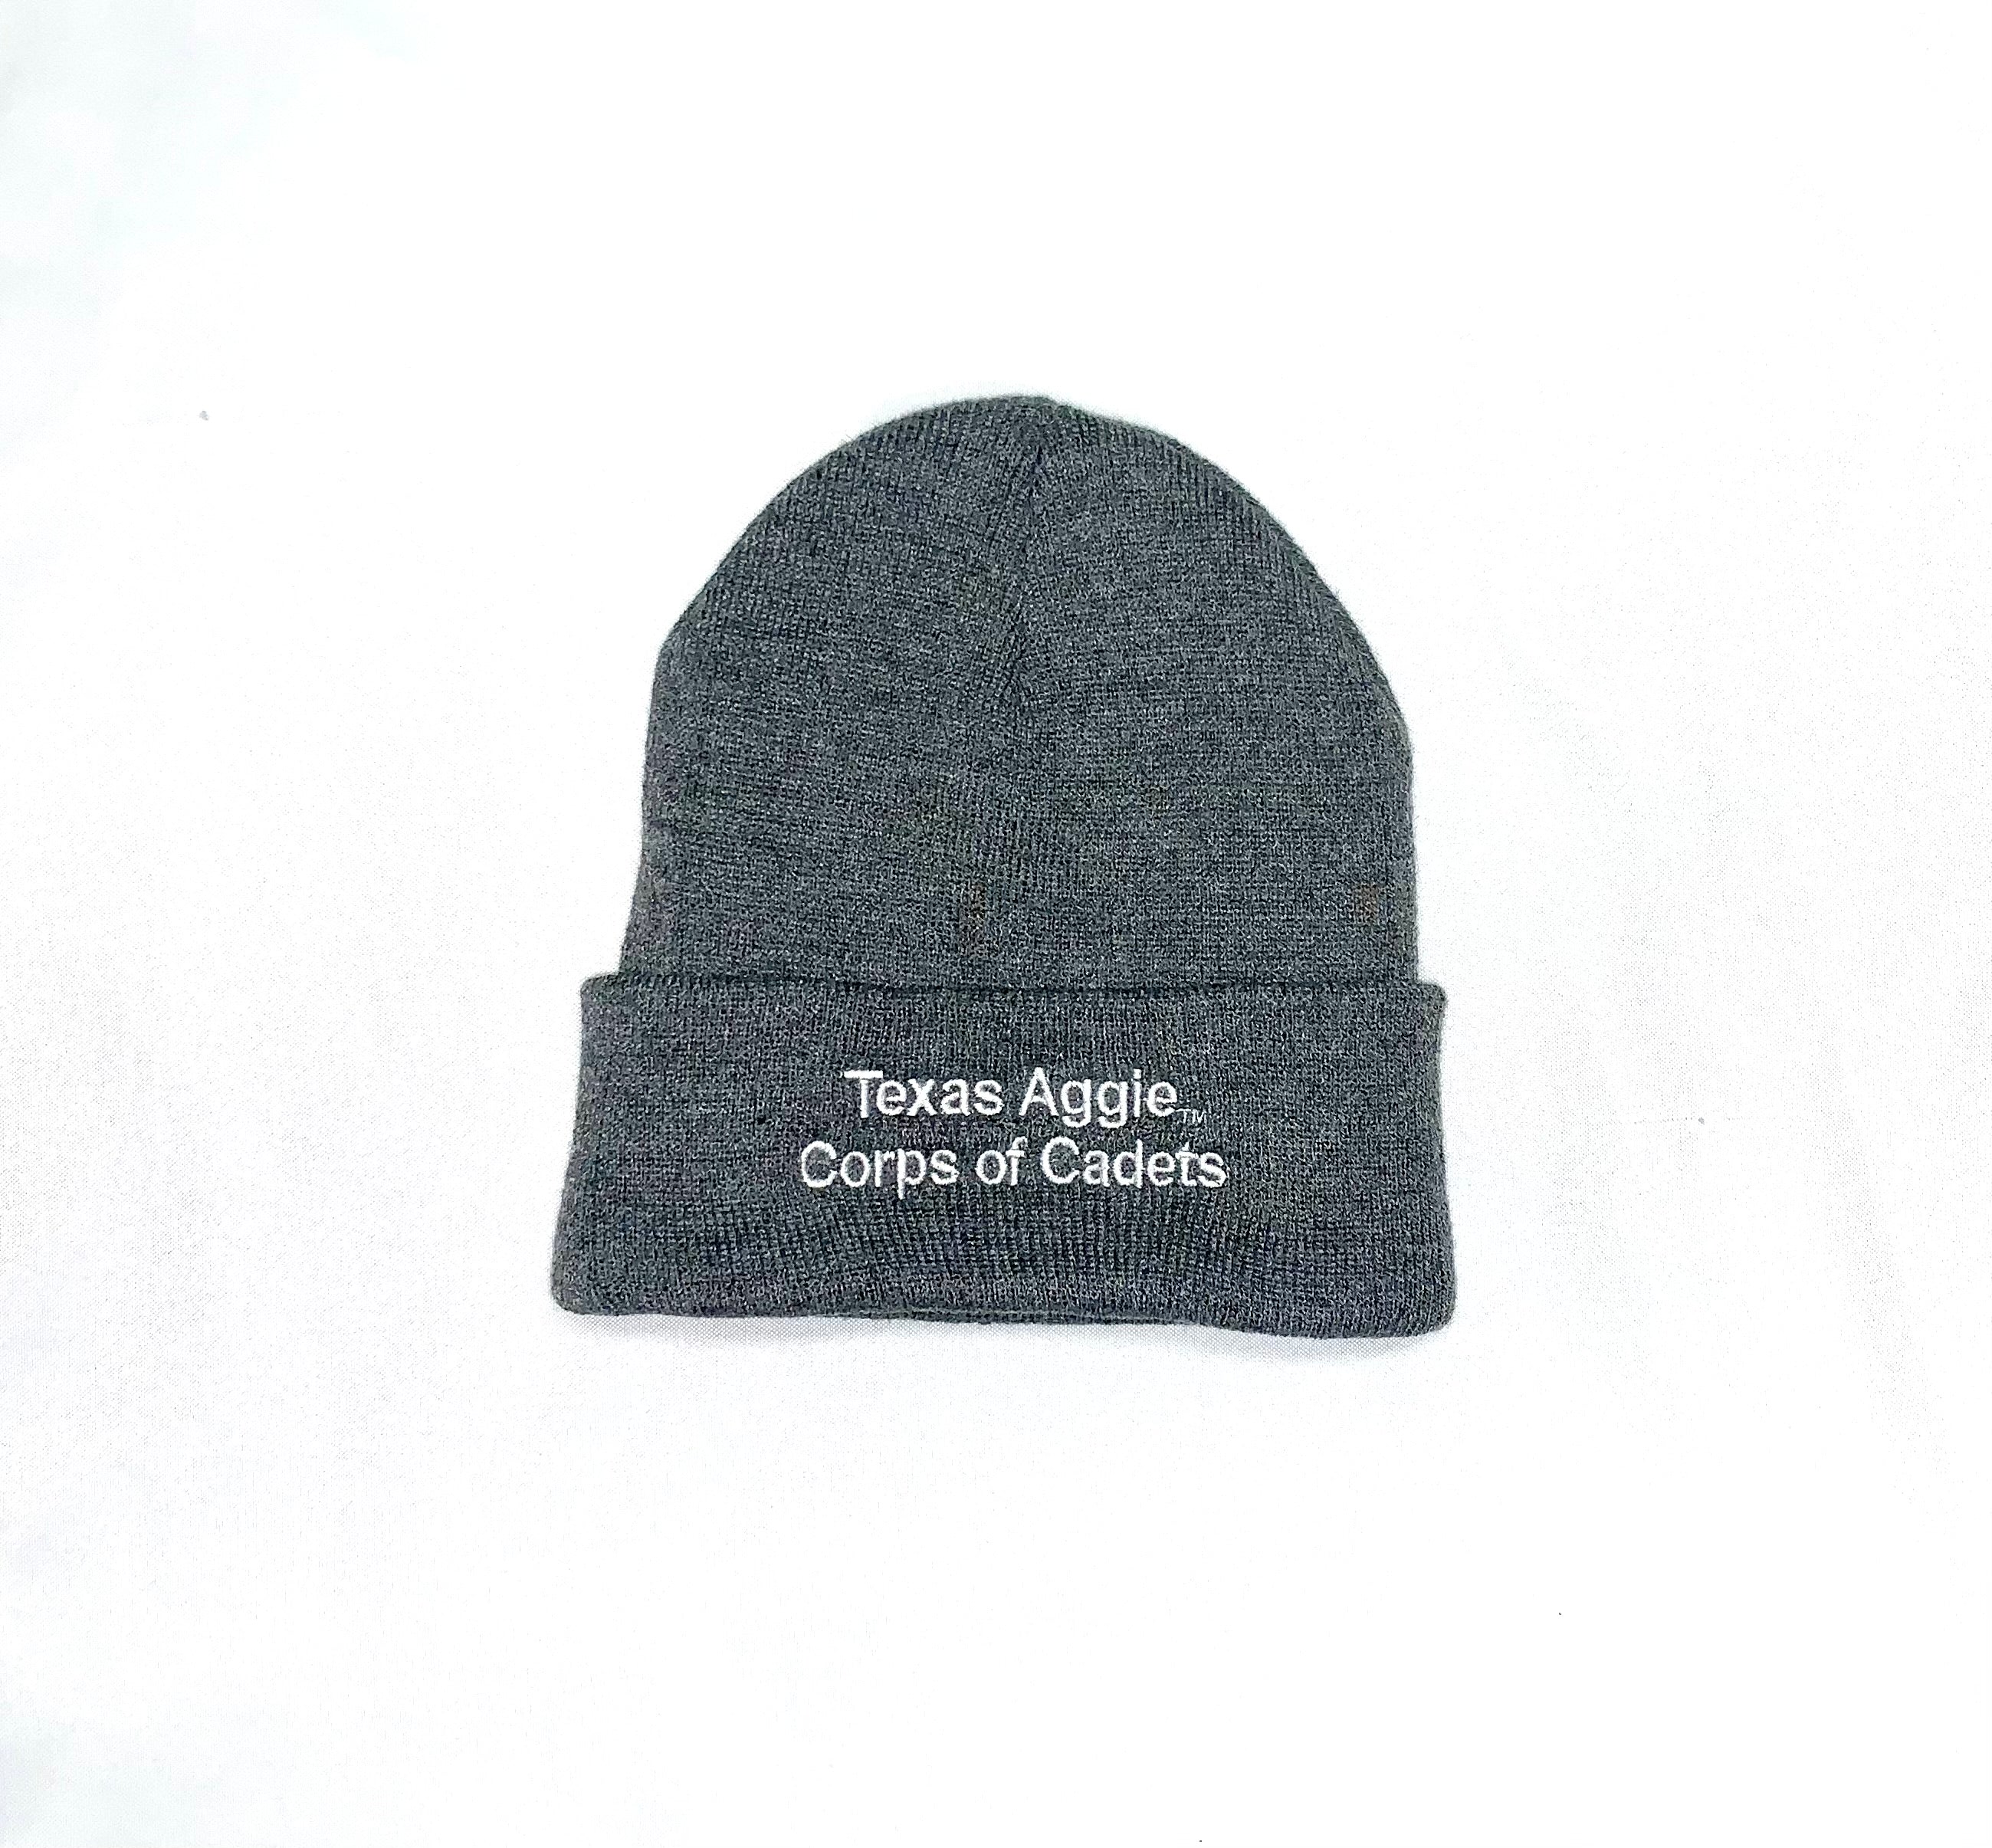 Corps of Cadets Beanie